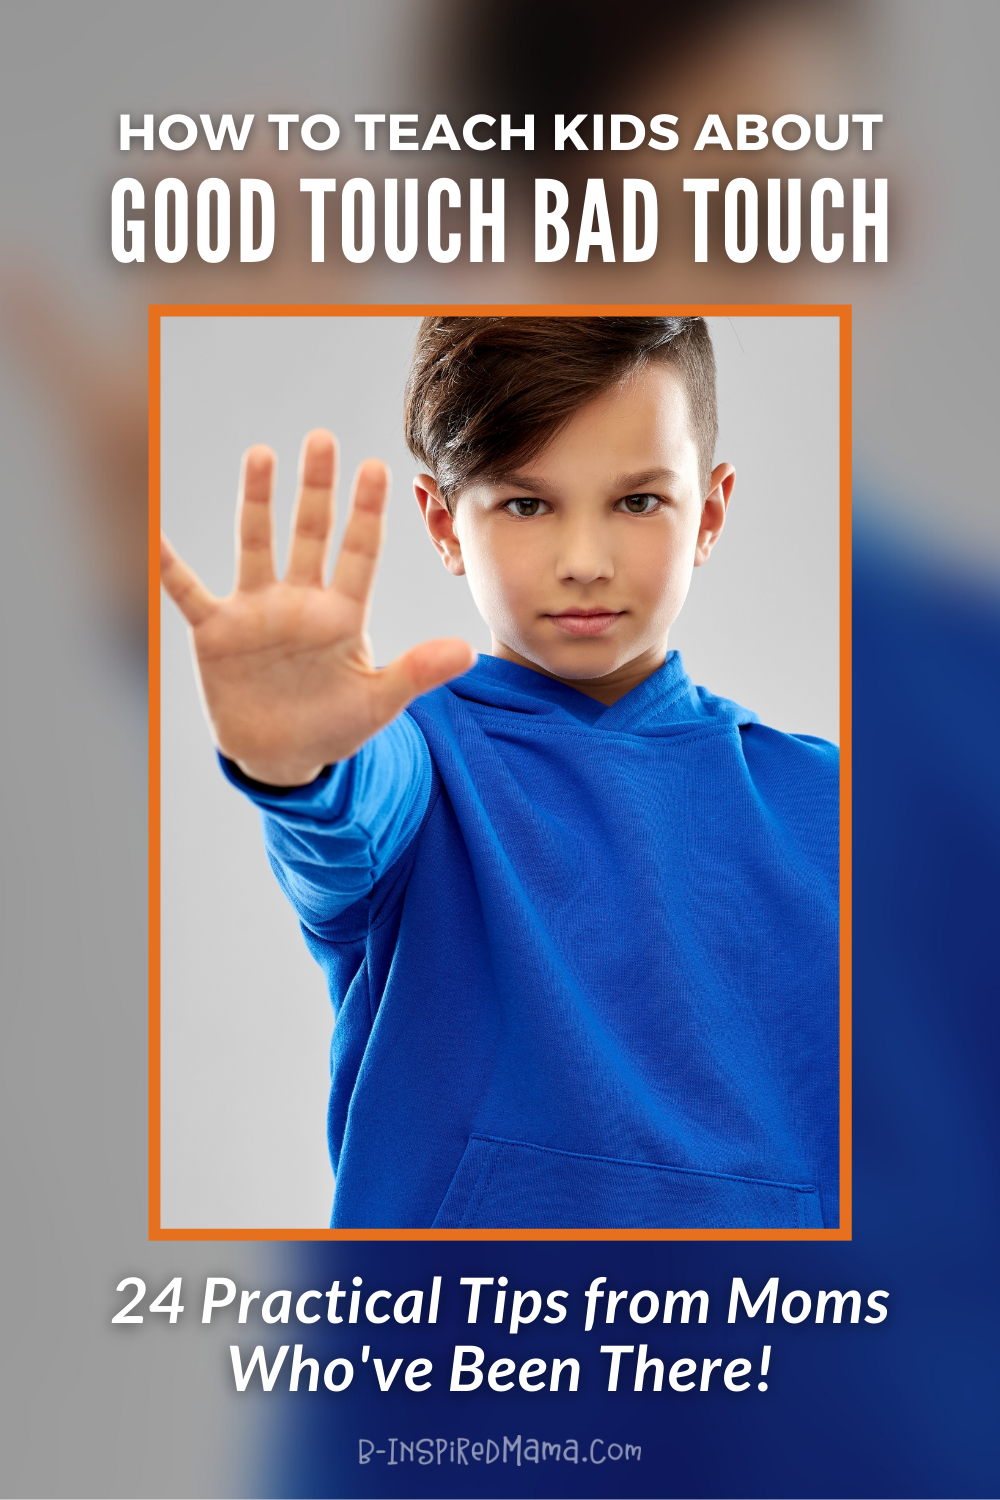 A photo of a young boy facing the viewer with his arm and hand outstretched as if to say "Stop!" Text reads "How to Teach Kids About Good Touch Bad Touch" and "24 Practical Tips from Moms Who've Been There!" along with the logo "B-InspiredMama.com".